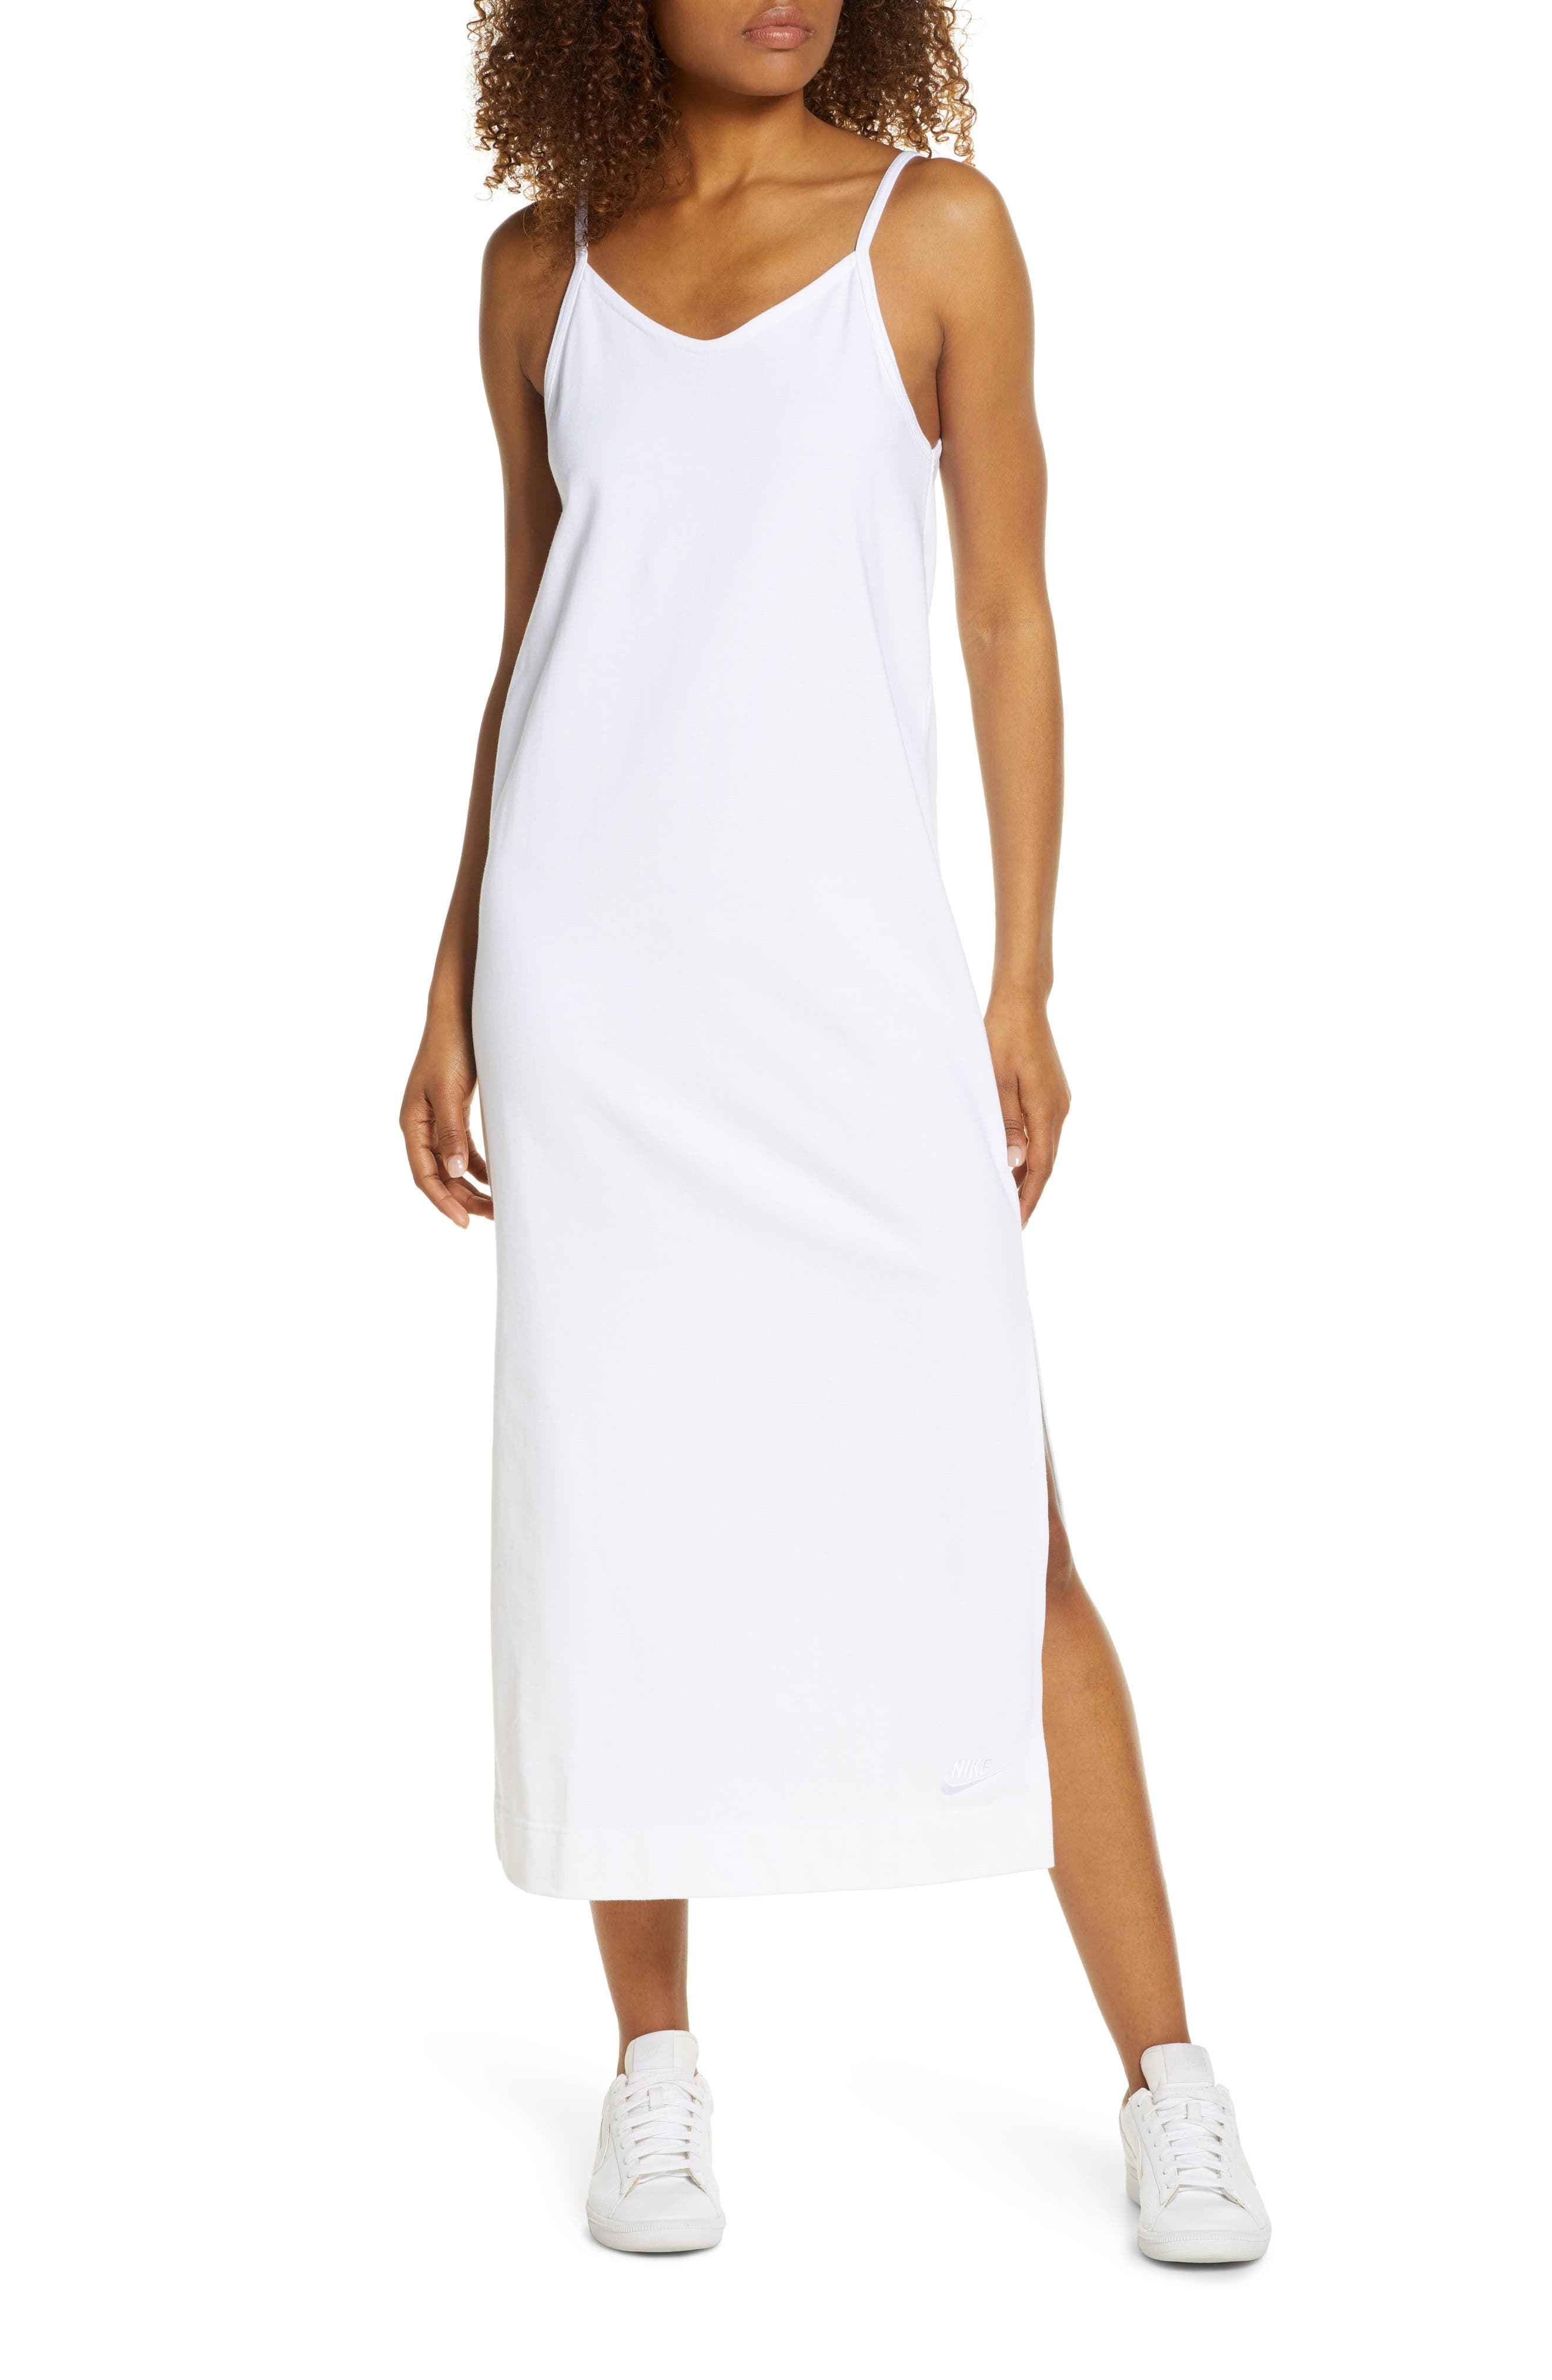 white dresses in stores